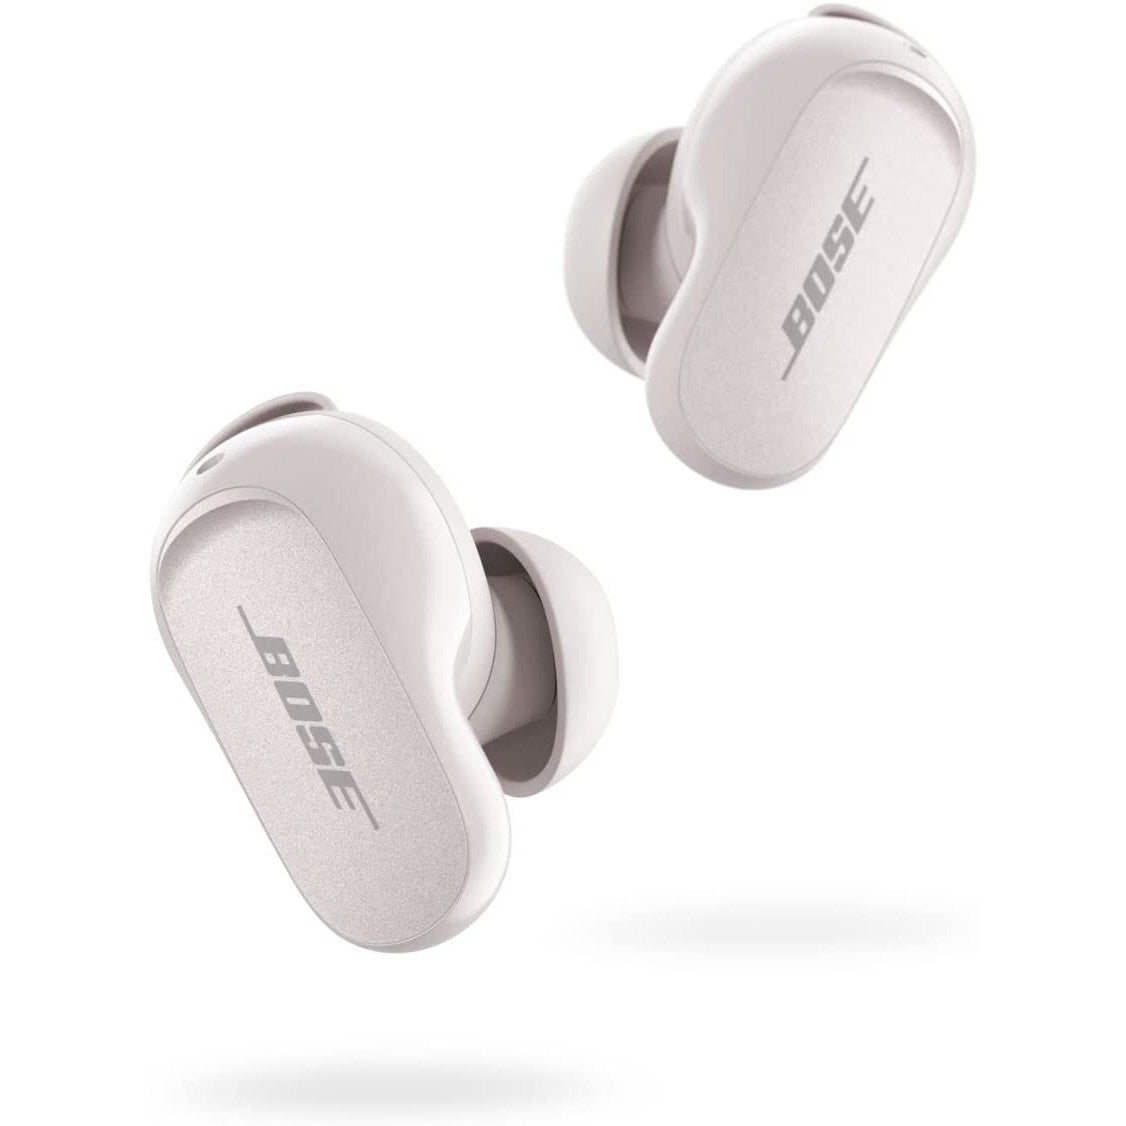 Bose QuietComfort II Wireless Noise-Cancelling Earbuds - White - New